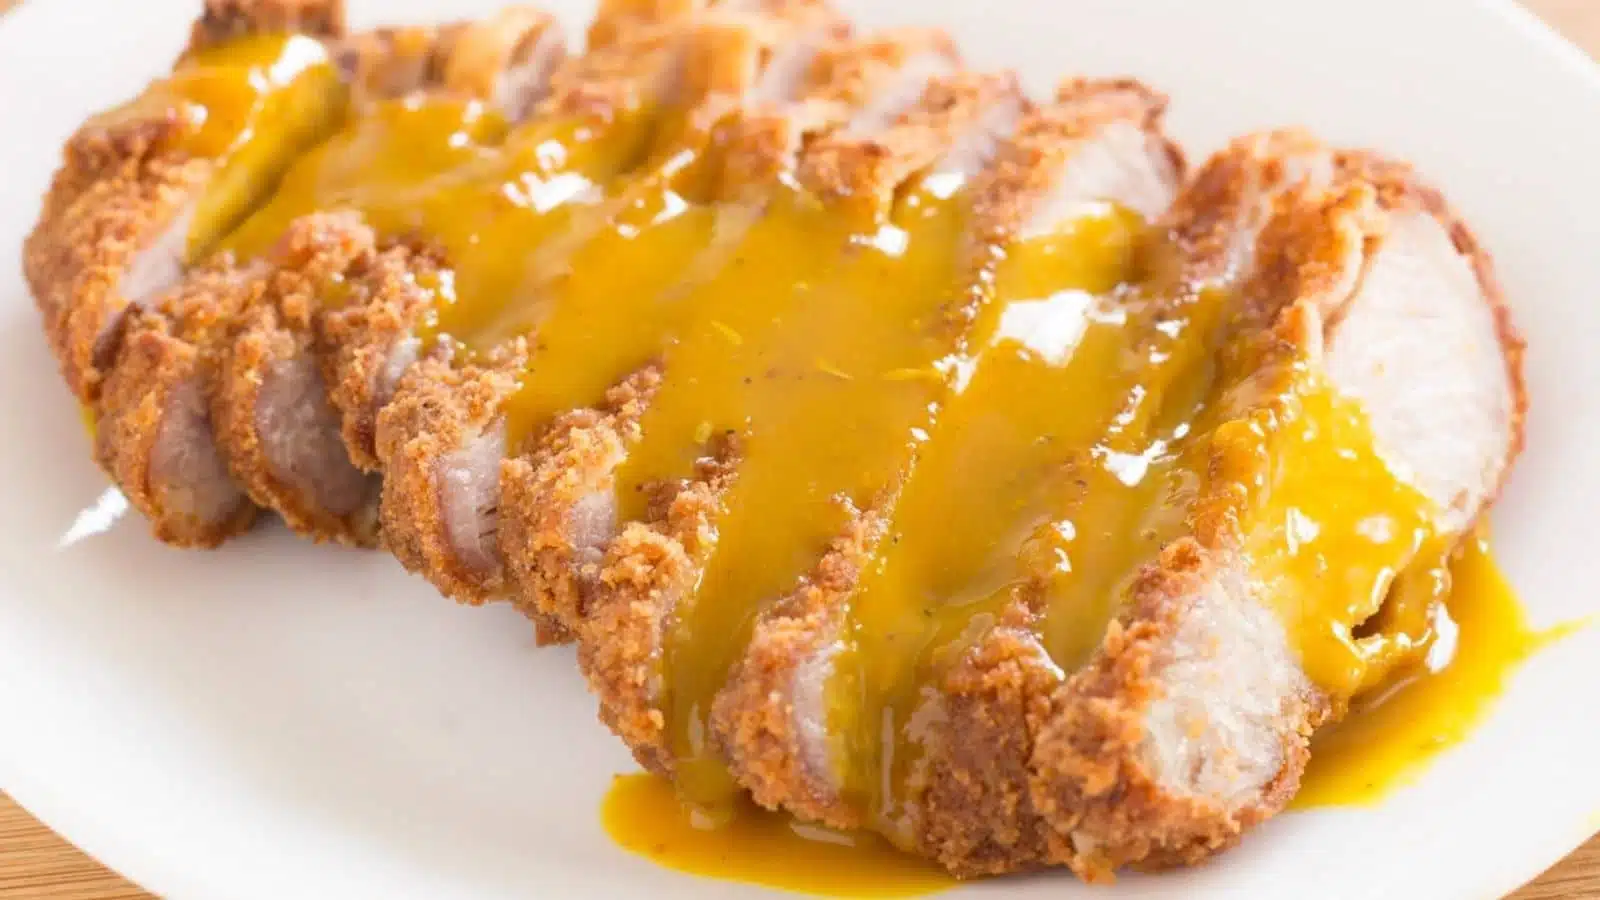 Breaded pork on a plate with a sauce on it